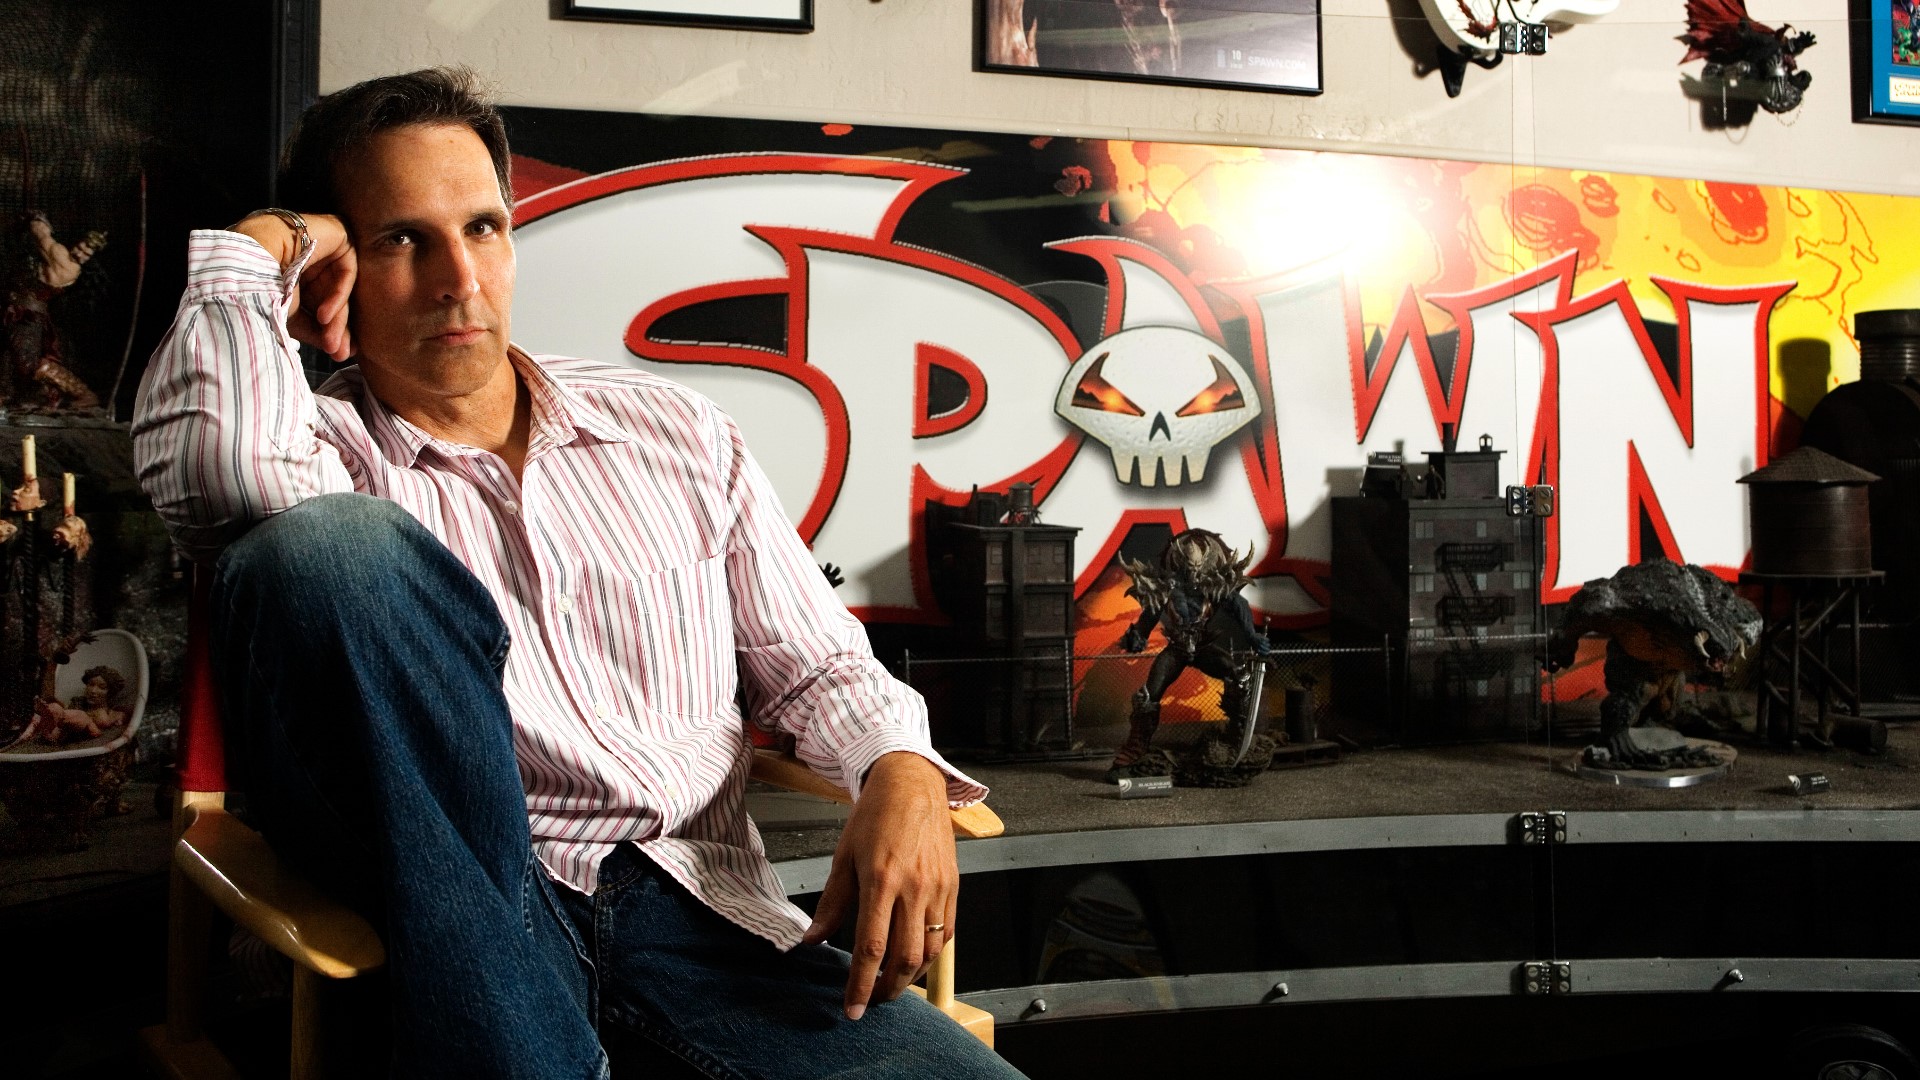 Todd McFarlane said his business is performing well during the COVID-19 pandemic. The Phoenix comic book artist discussed why his industry is finding success.